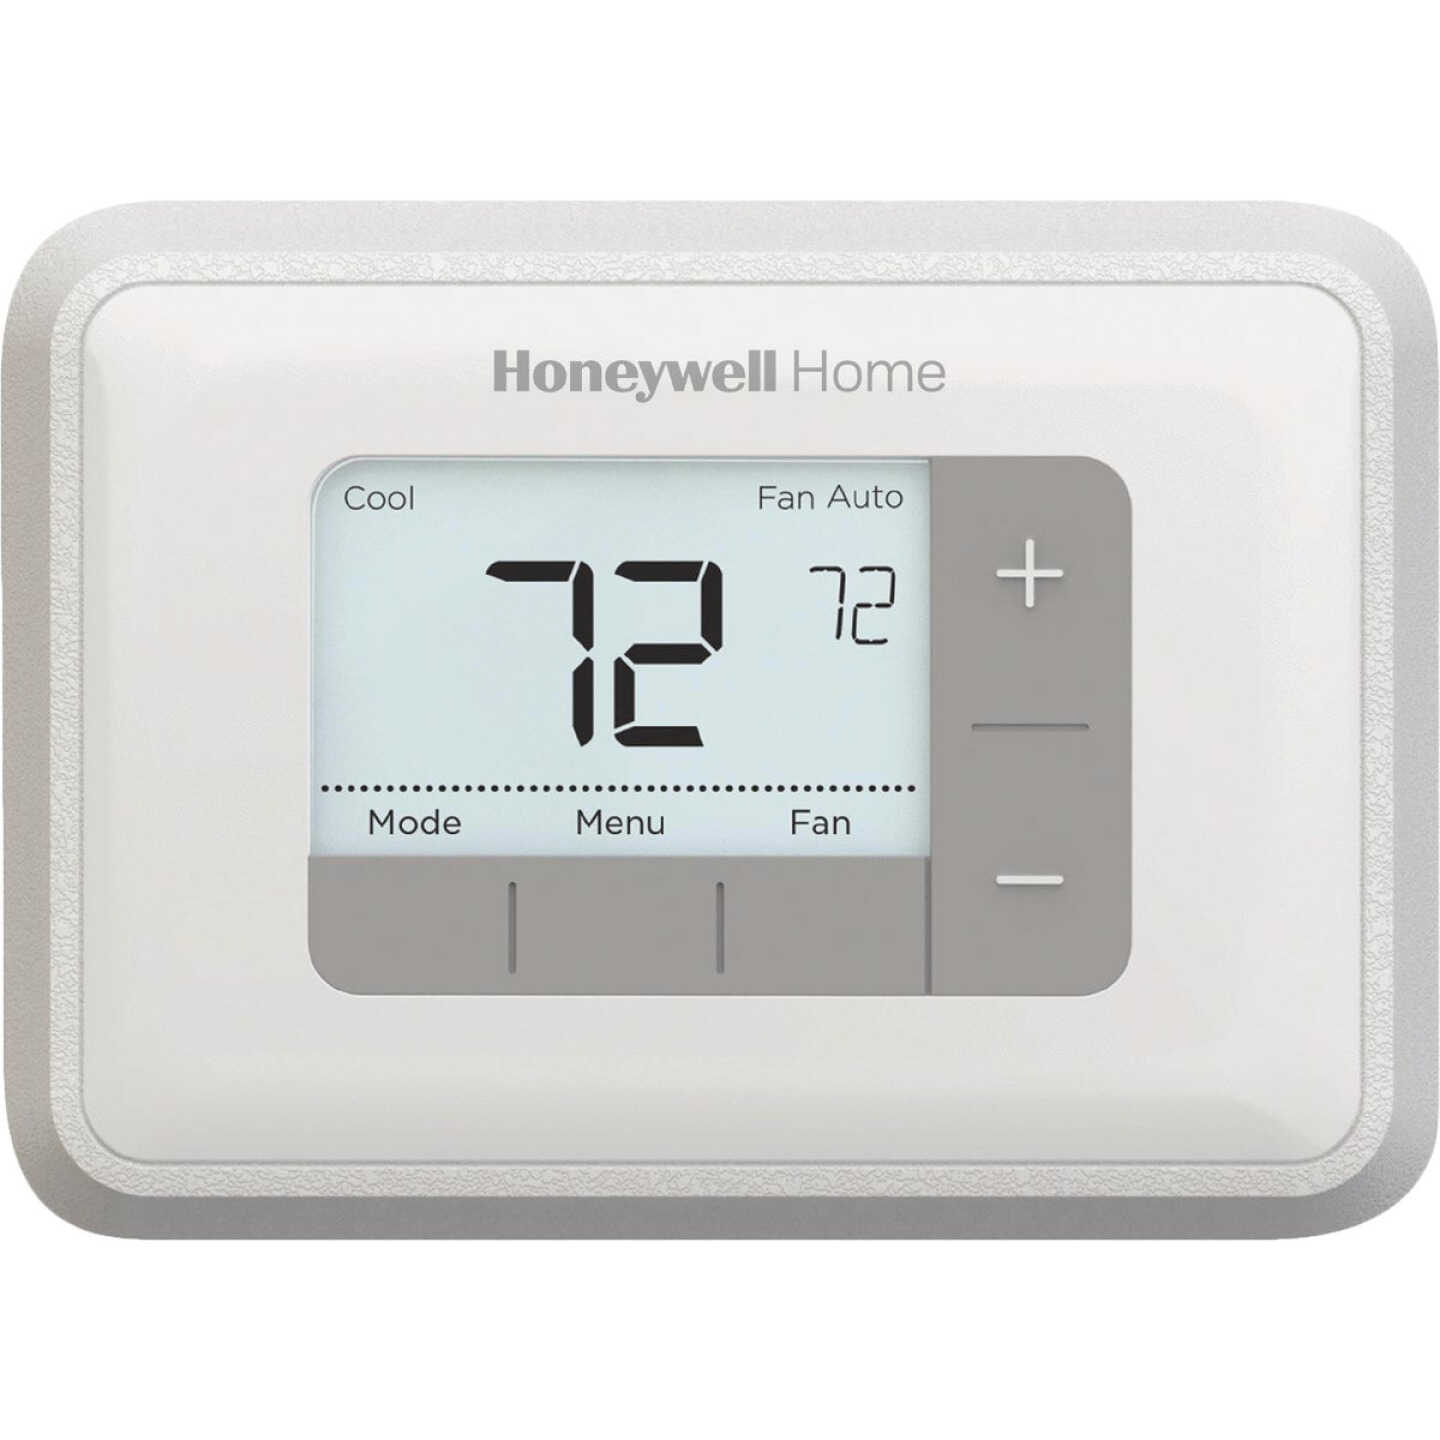 Honeywell Home 5-2 Day Programmable White Digital Thermostat Image 1